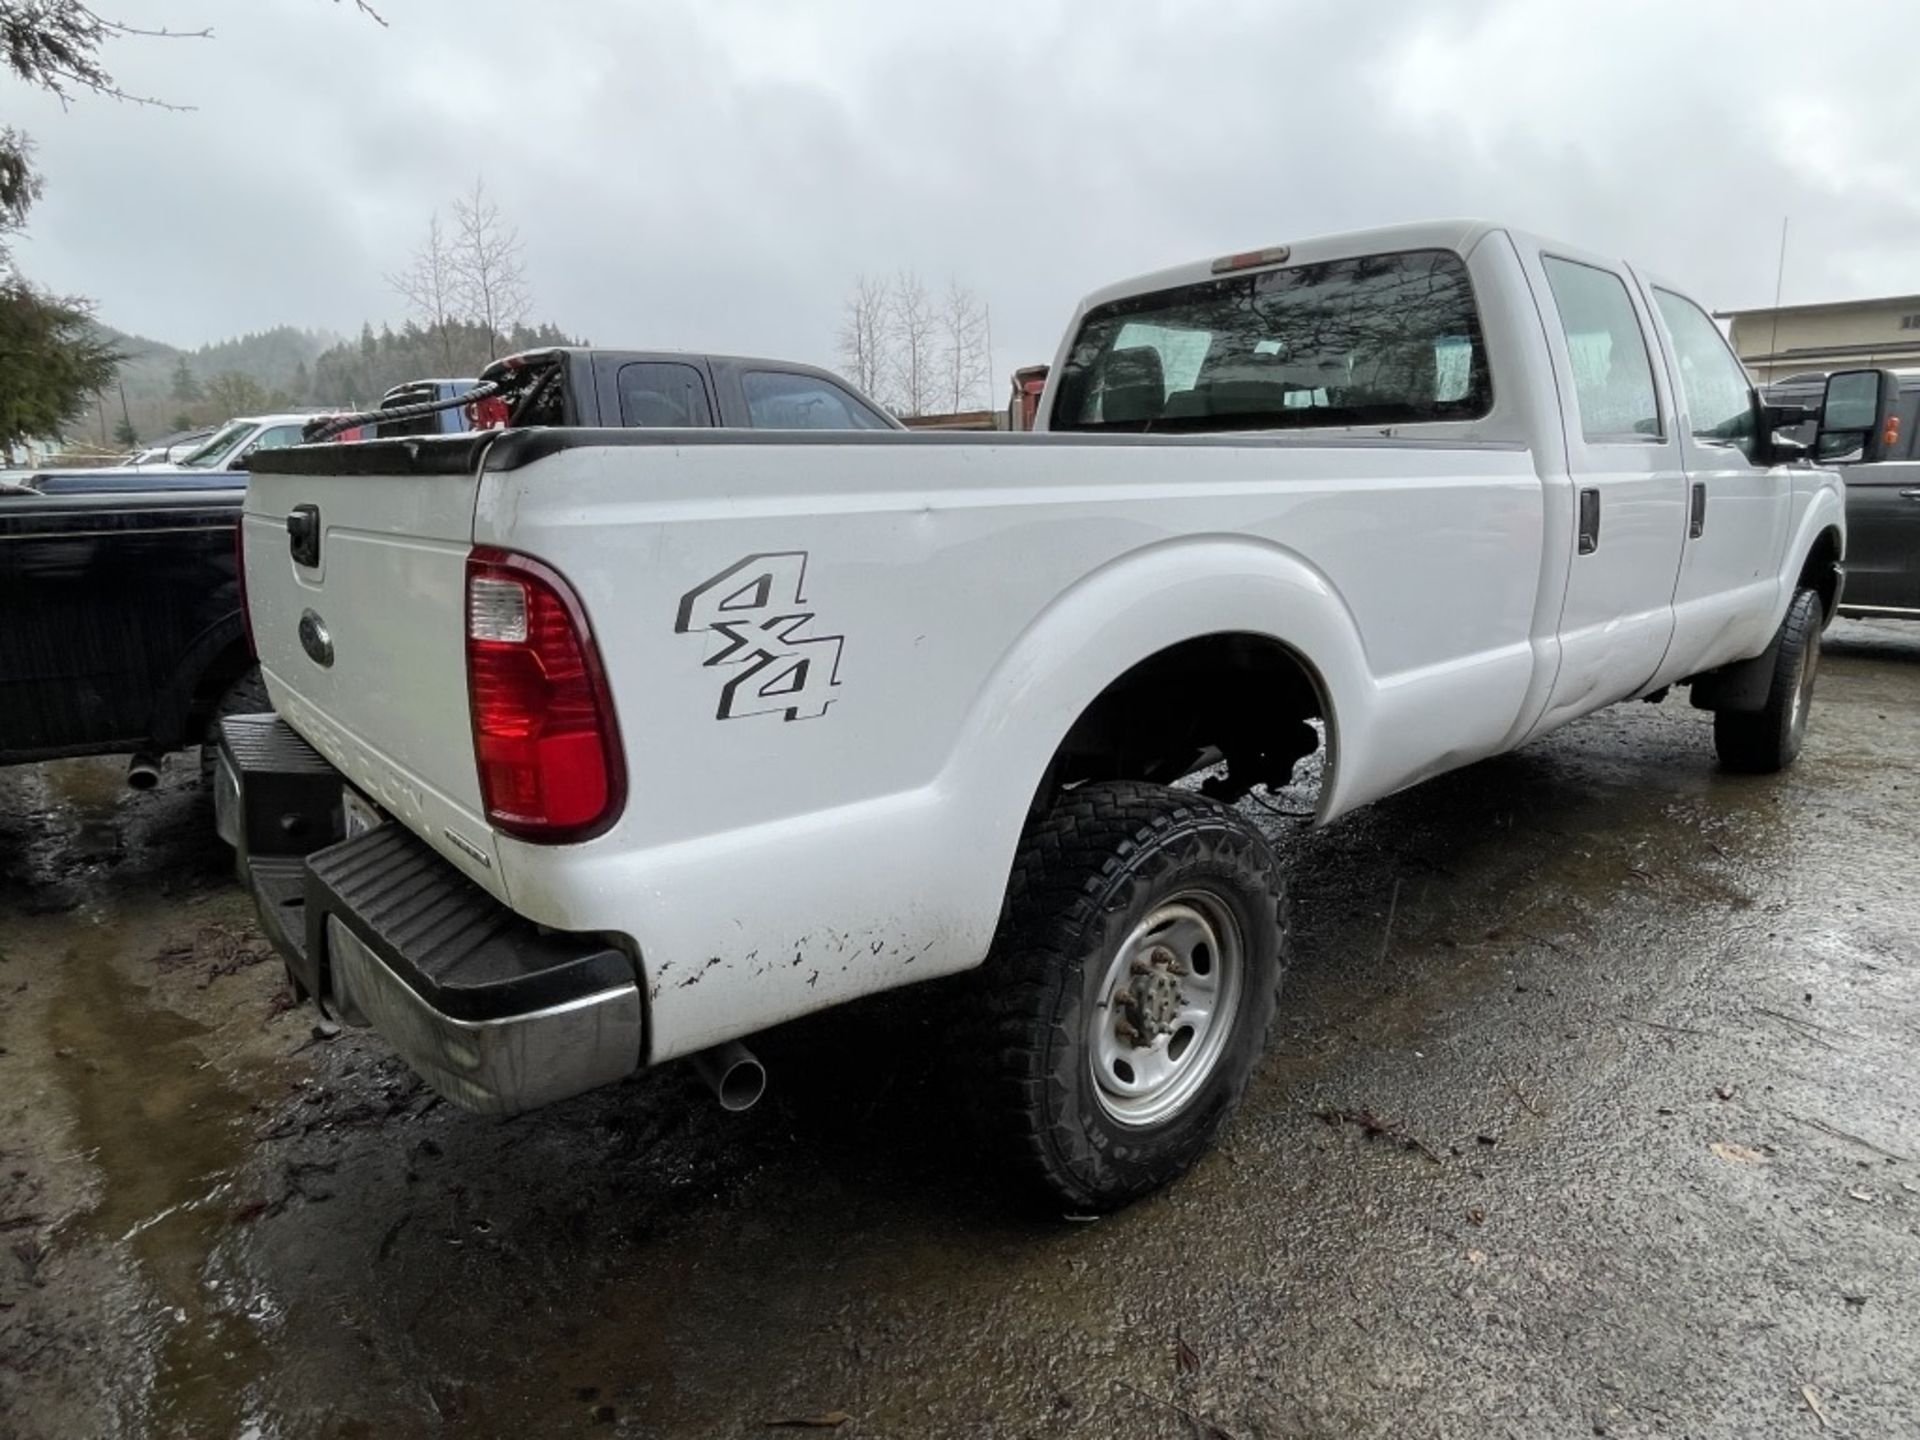 2014 Ford F350 SD 4x4 Crew Cab Pickup - Image 3 of 15